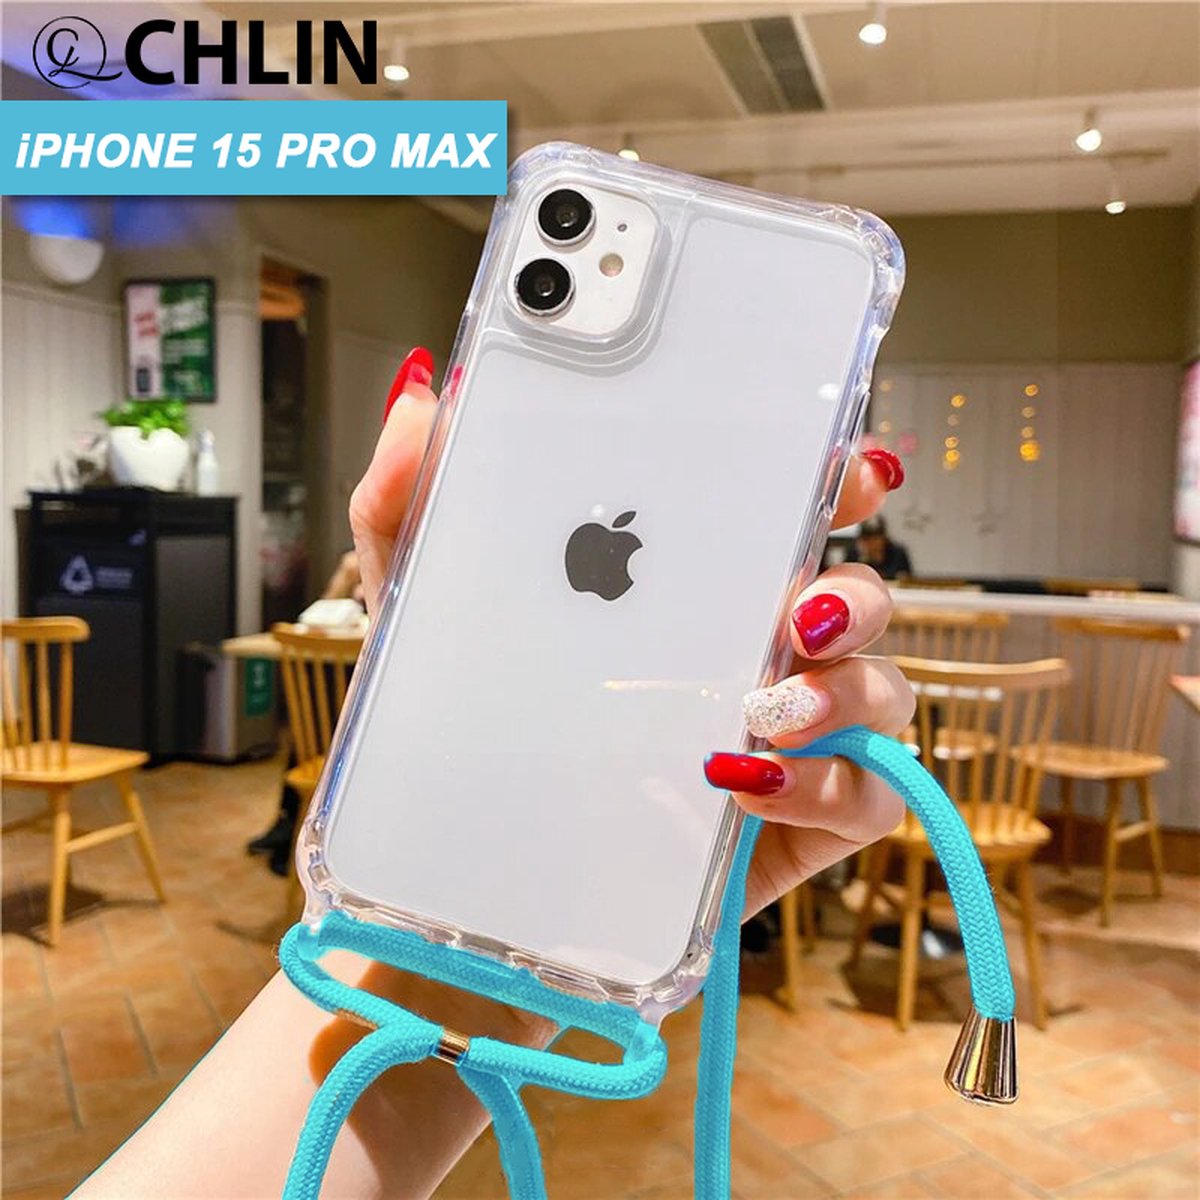 CL CHLIN® - iPhone 15 Pro Max transparant hoesje met BLAUW koord - Hoesje met koord iPhone 15 Pro Max - iPhone 15 Pro Max case - iPhone 15 Pro Max hoes - iPhone hoesje met cord - iPhone 15 Pro Max bescherming - iPhone 15 Pro Max protector